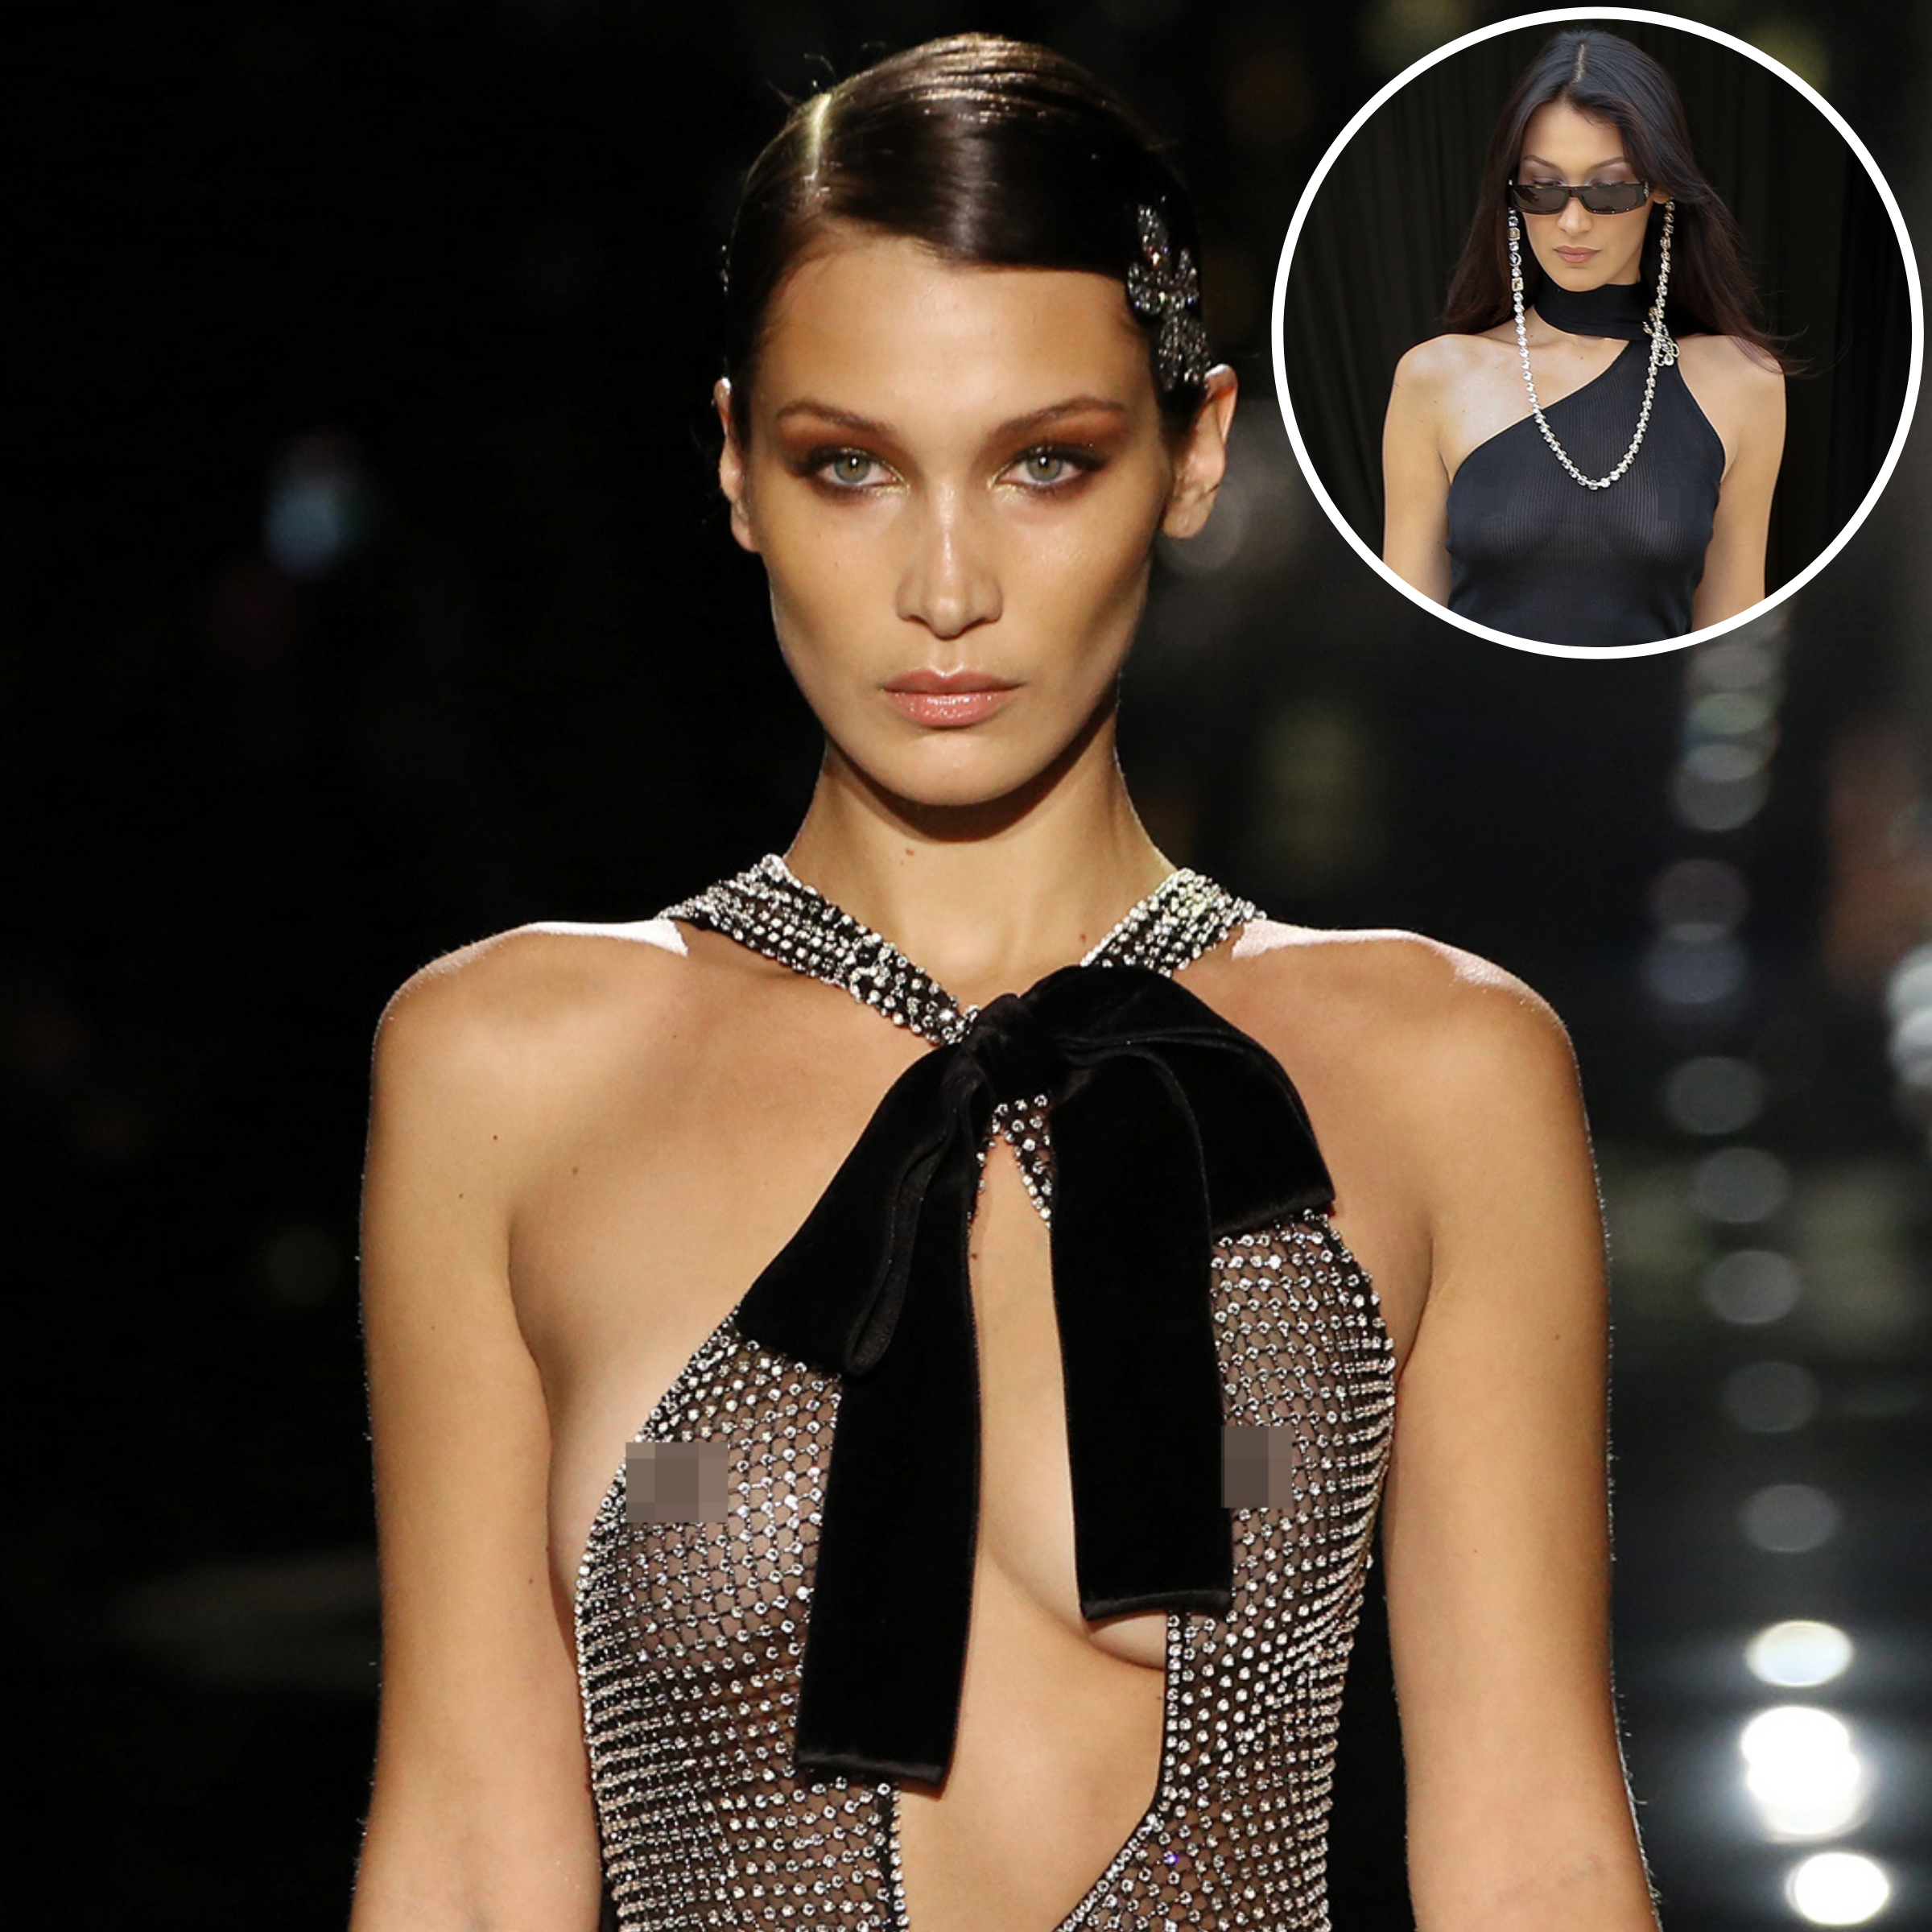 Bella Hadid Braless: Photos of the Model Not Wearing a Bra